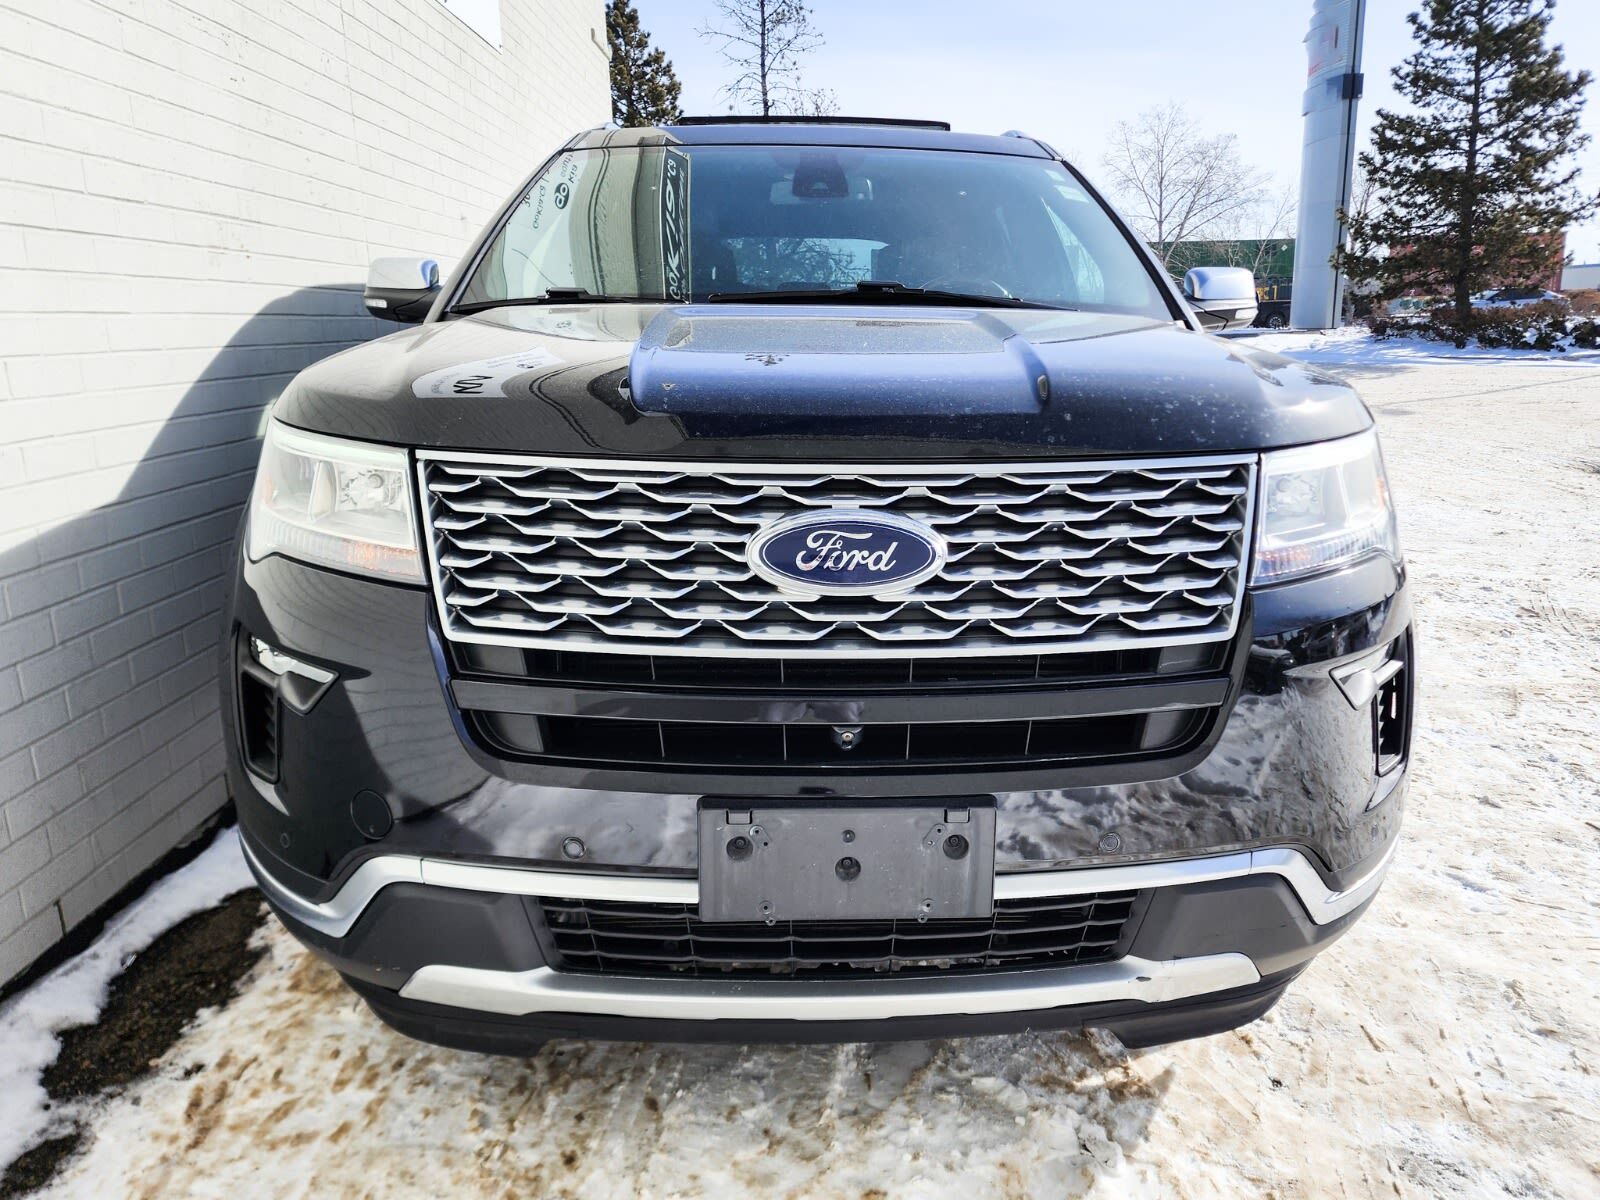 2019 Ford Explorer PLATINUM; AWD, HEATED/COOLED SEATS, HEATED REAR SE